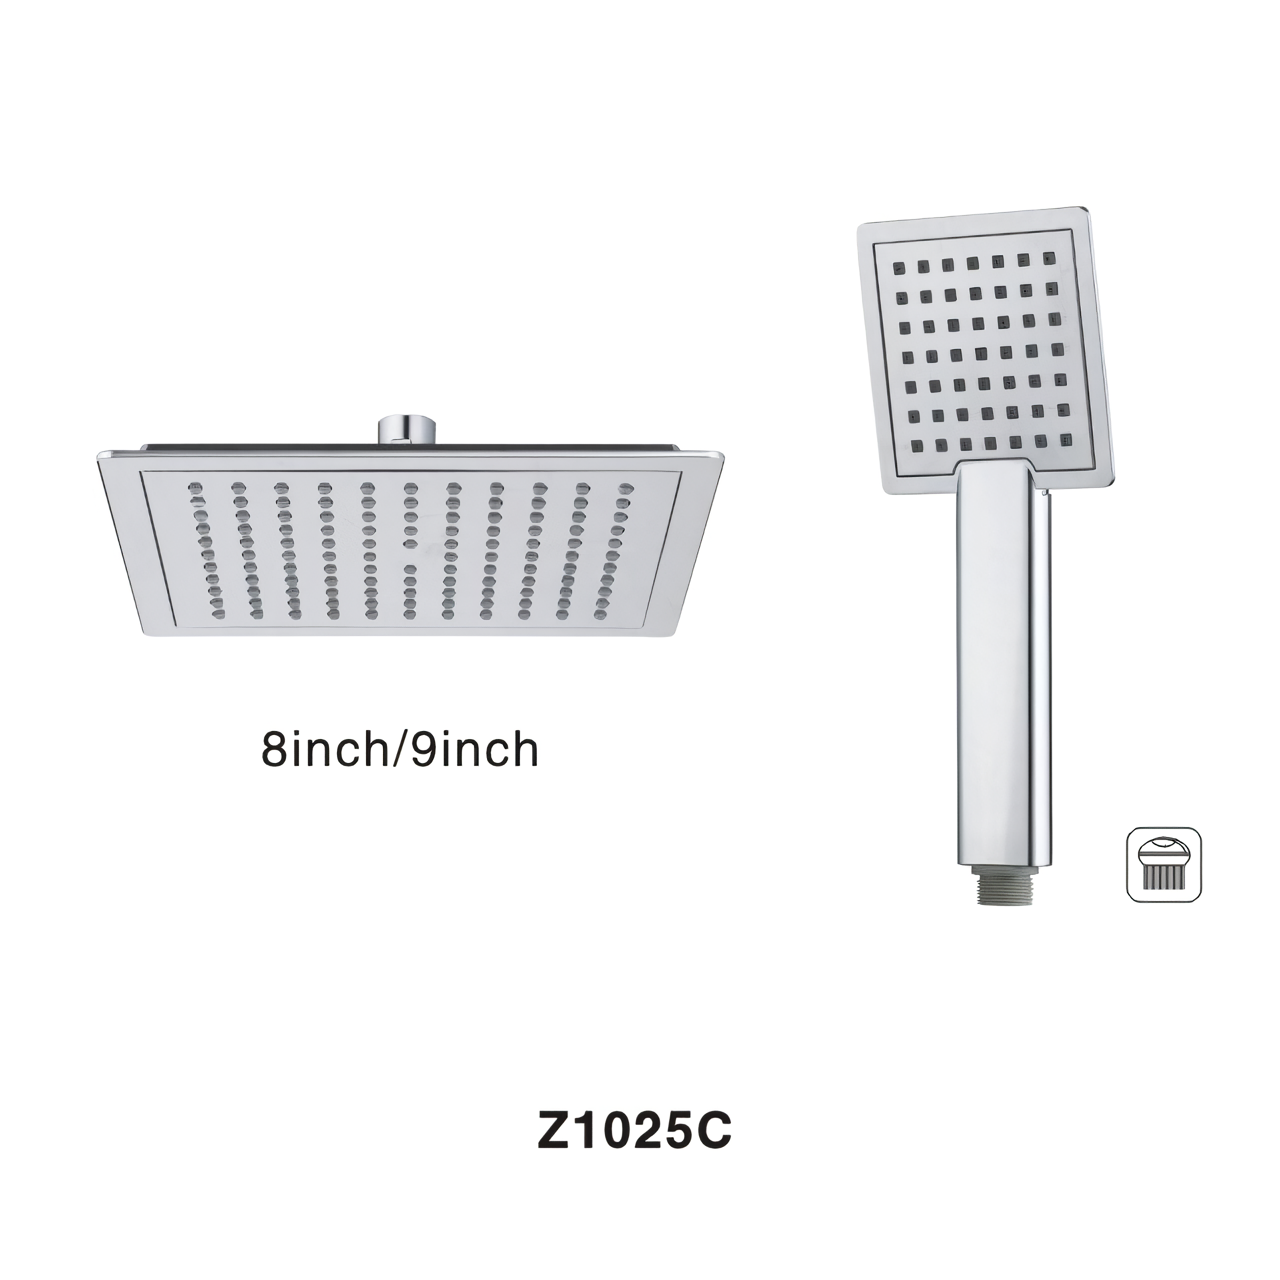 Z1025C 8 Inch/9 Inch Square Chrome Rain Anti Clog Self Cleaning Plastic Shower Head Adjustable Replacement for Plastic Hand Shower